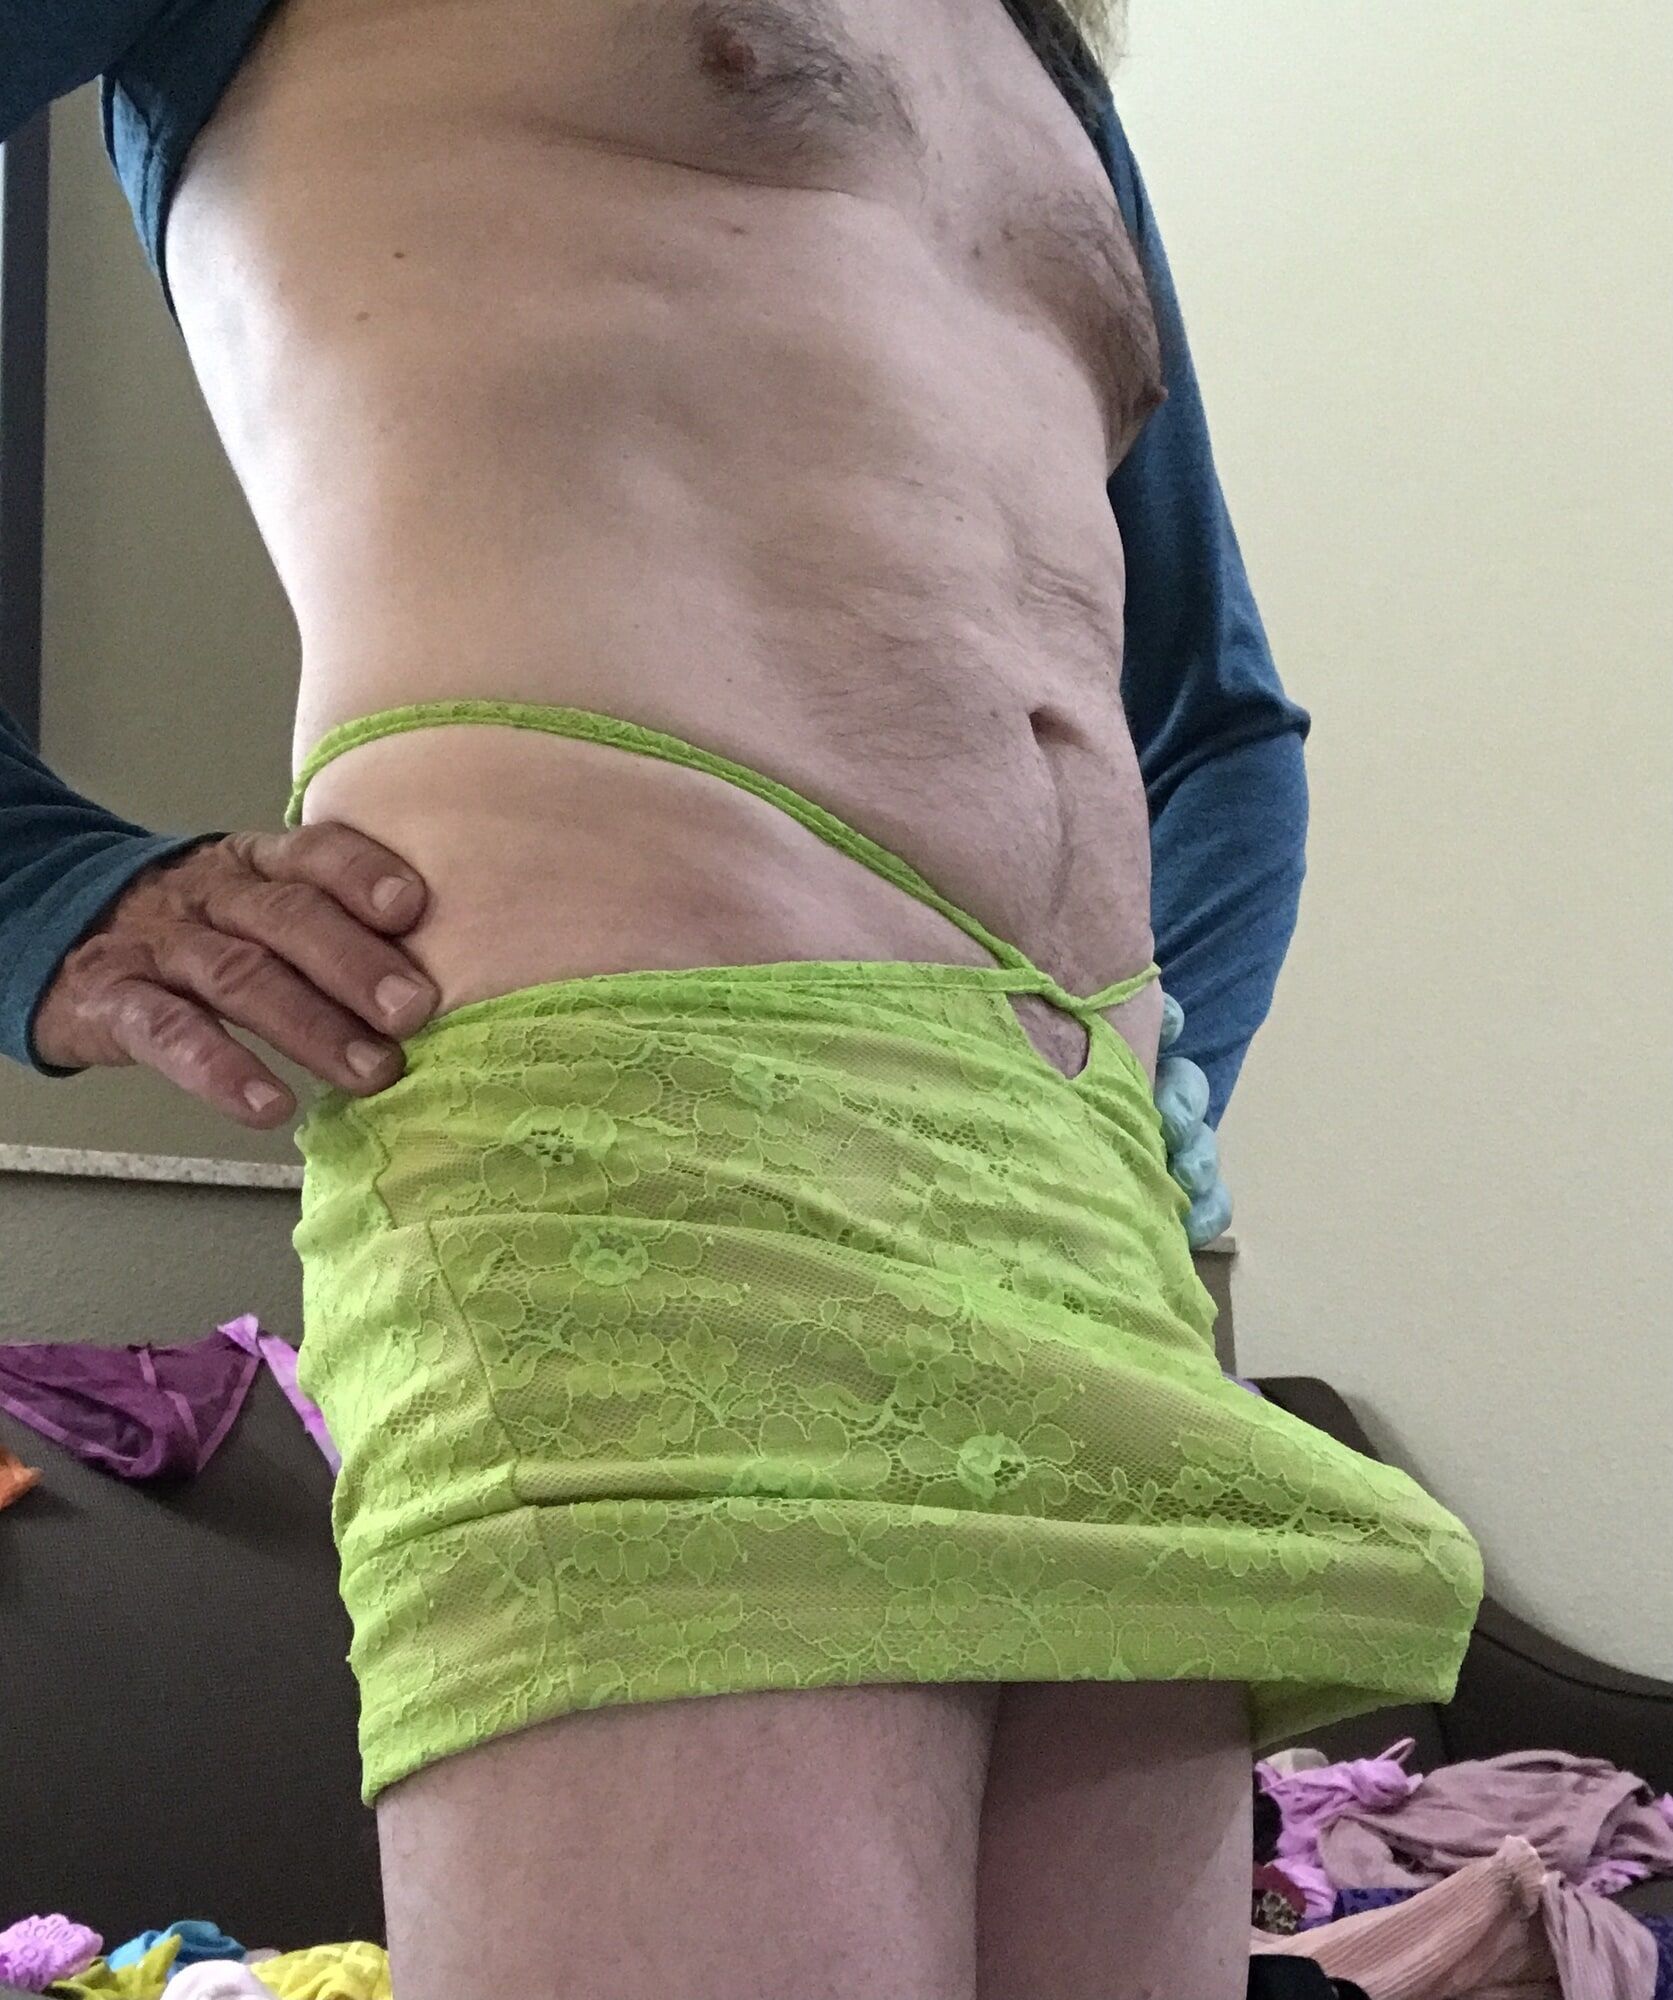 My lil bulge in some skirts #3